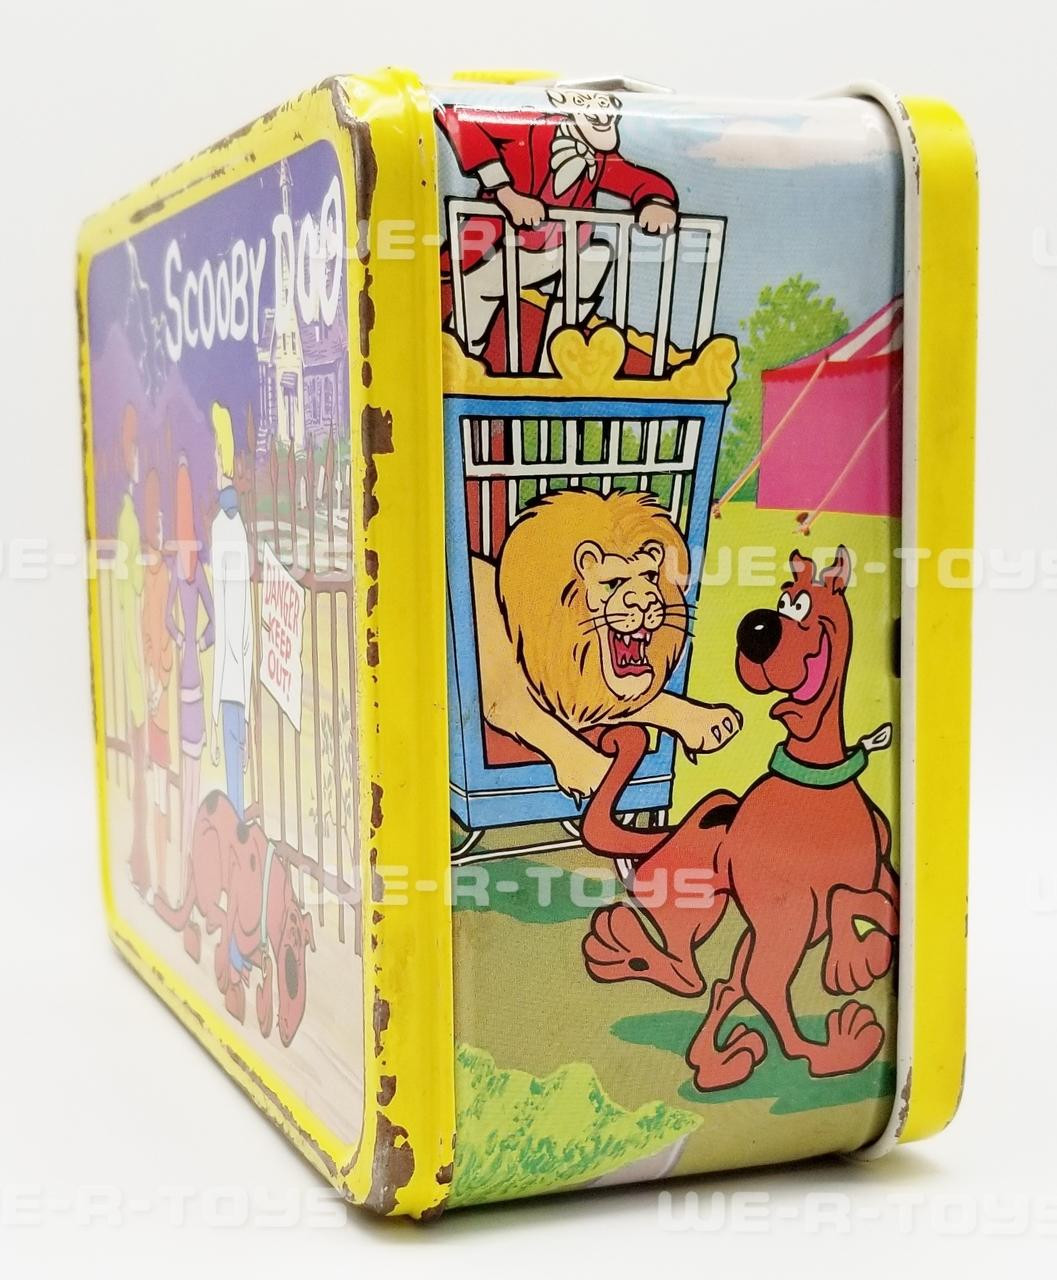 https://cdn11.bigcommerce.com/s-cy4lua1xoh/images/stencil/1280x1280/products/13431/85757/scooby-doo-tin-metal-lunchbox-and-thermos-1973-hanna-barbera-productions-used__49483.1659133228.jpg?c=1?imbypass=on